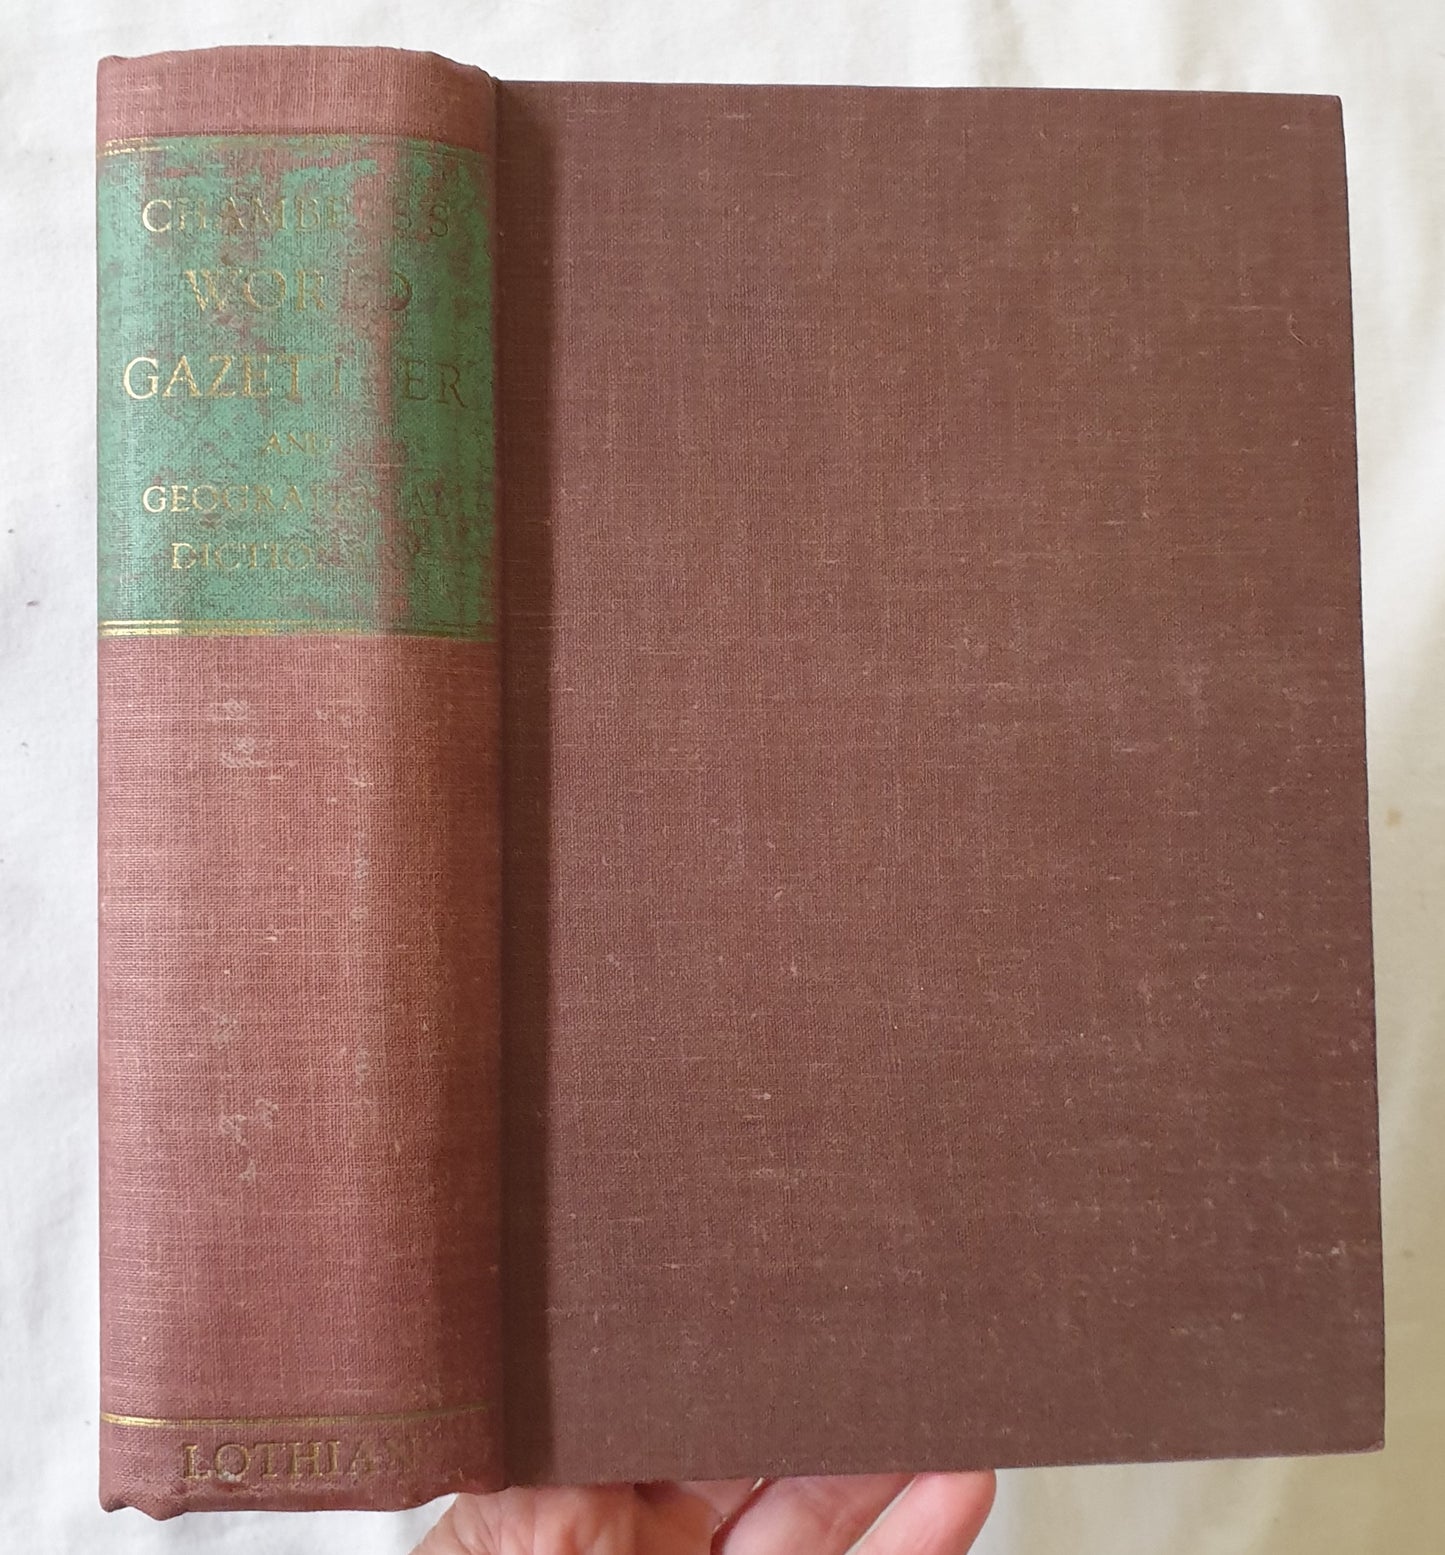 Chamber's World Gazetteer and Geographical Dictionary  Edited by  T. C. Collocott and J. O. Thorne